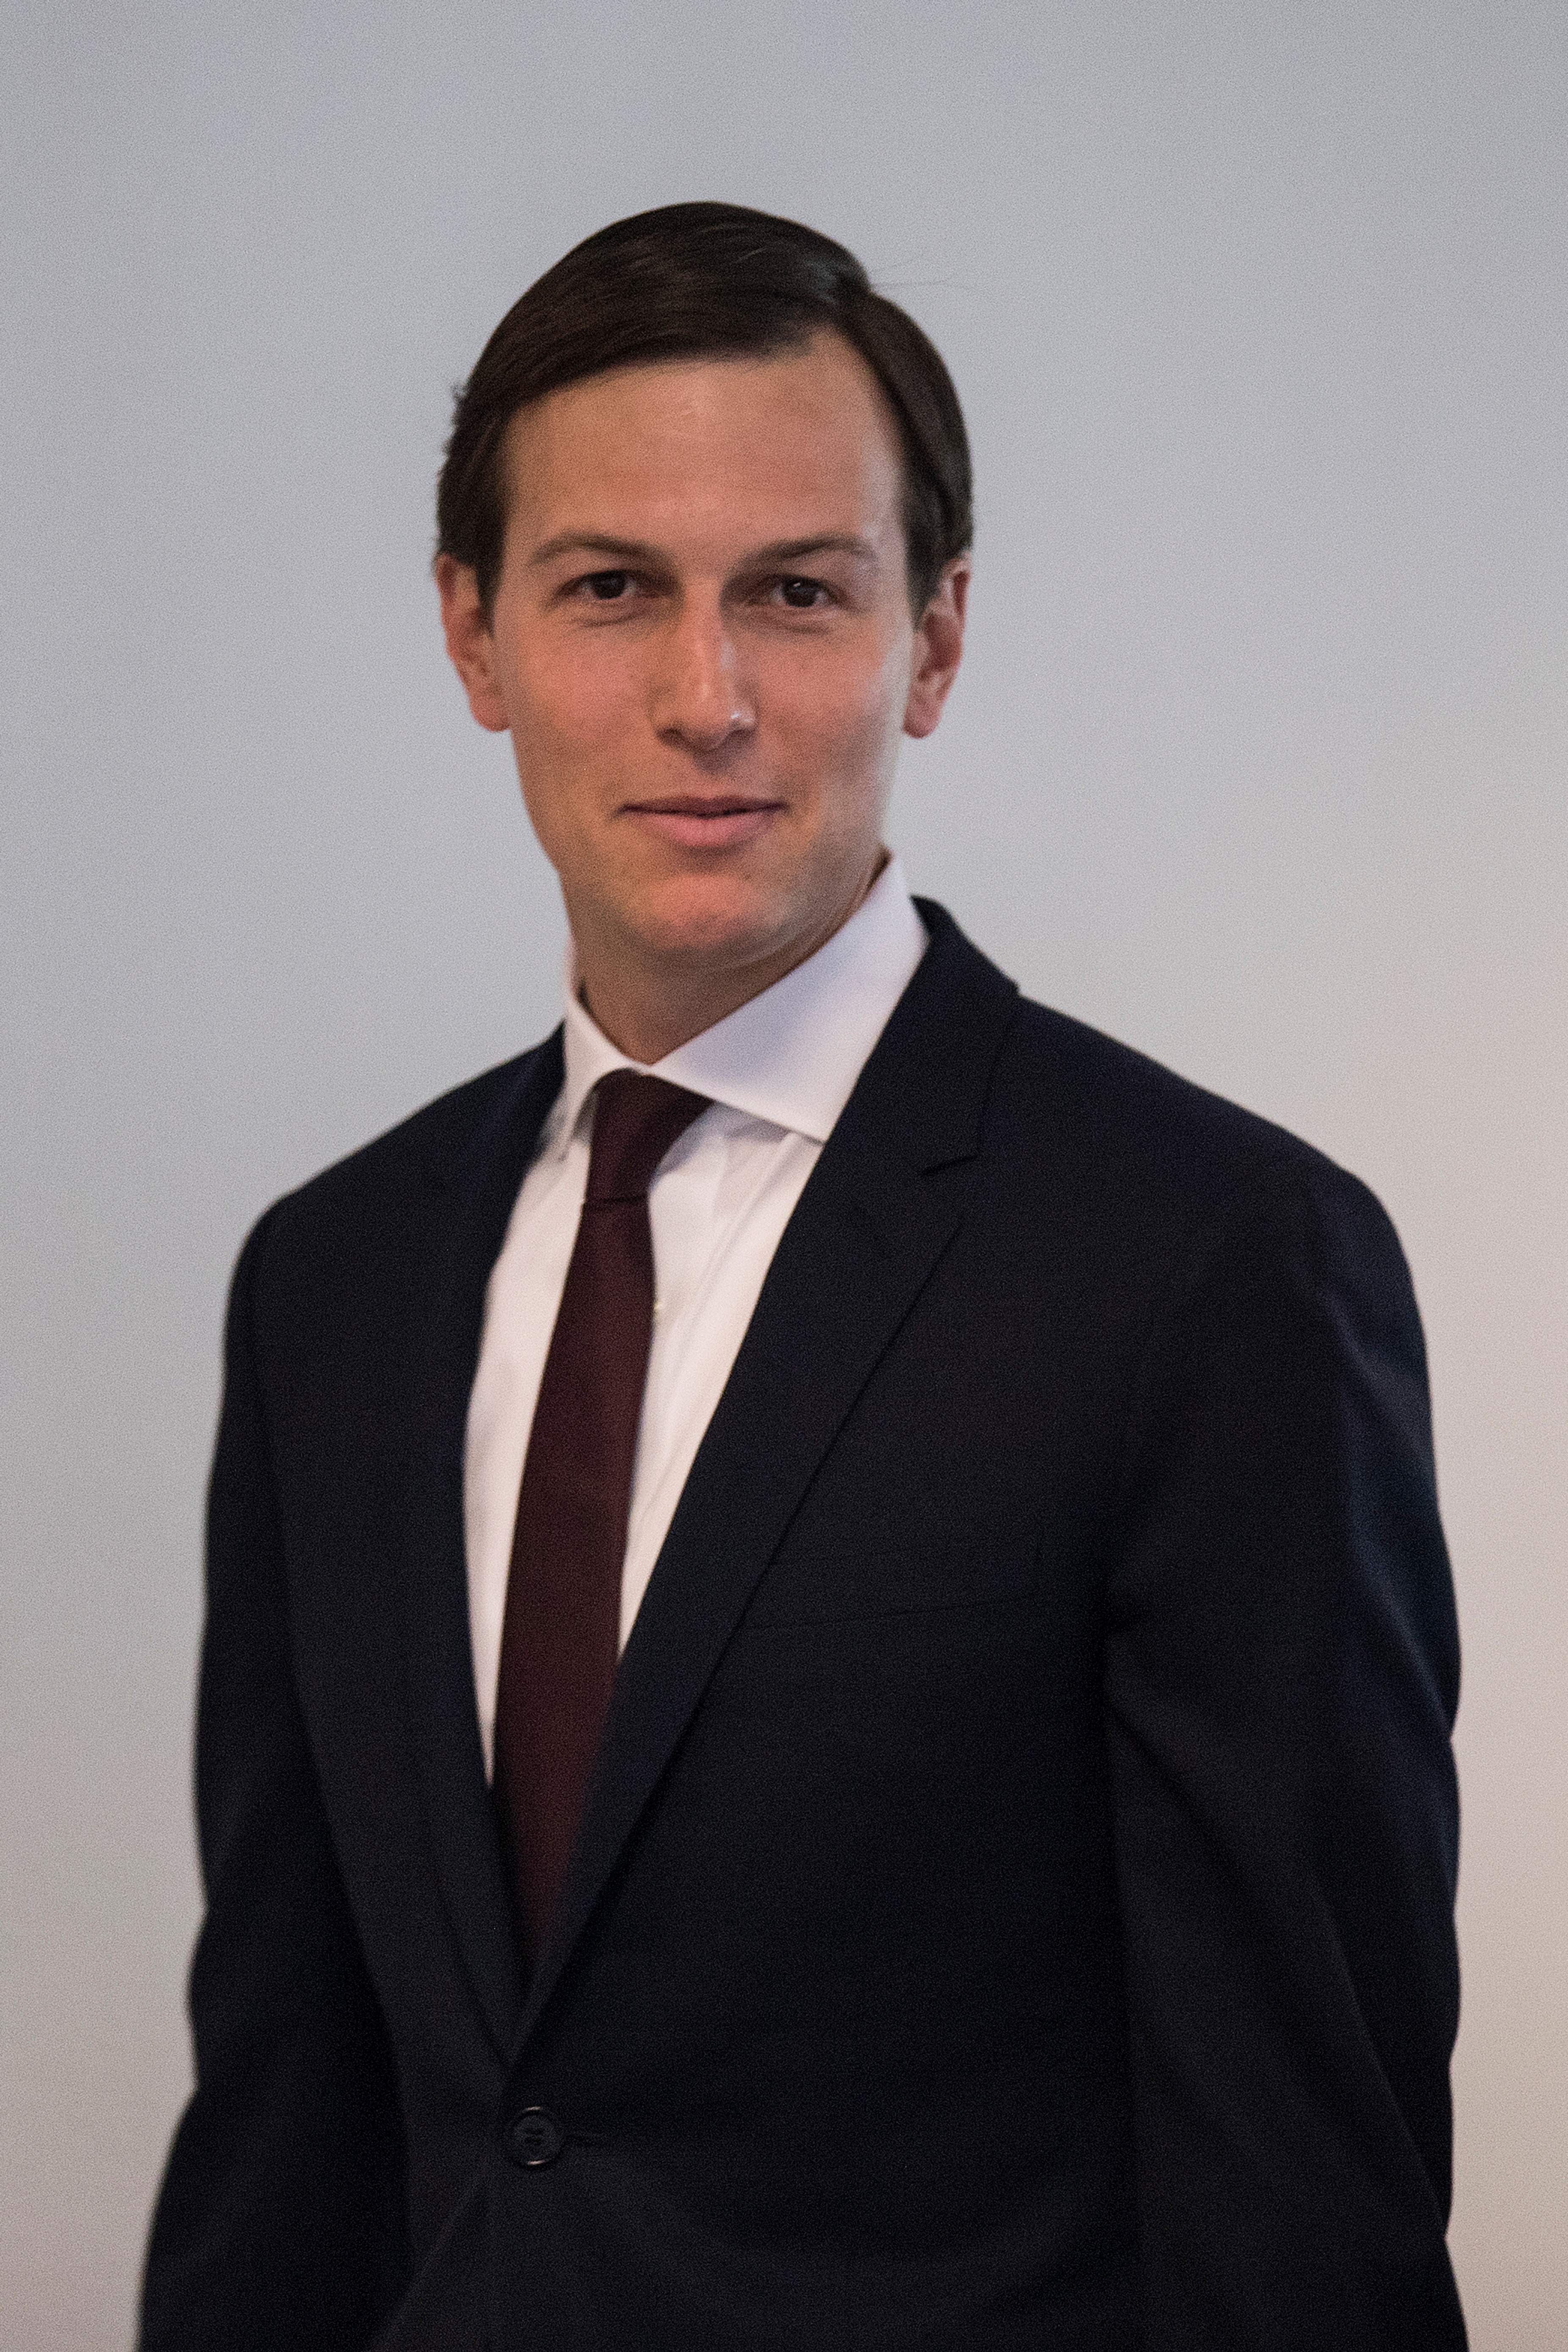 Jared Kushner, US President Donald Trump's senior adviser and son-in-law, arrives on Capitol Hill in Washington, DC, on July 24, 2017 | Source: Getty Images